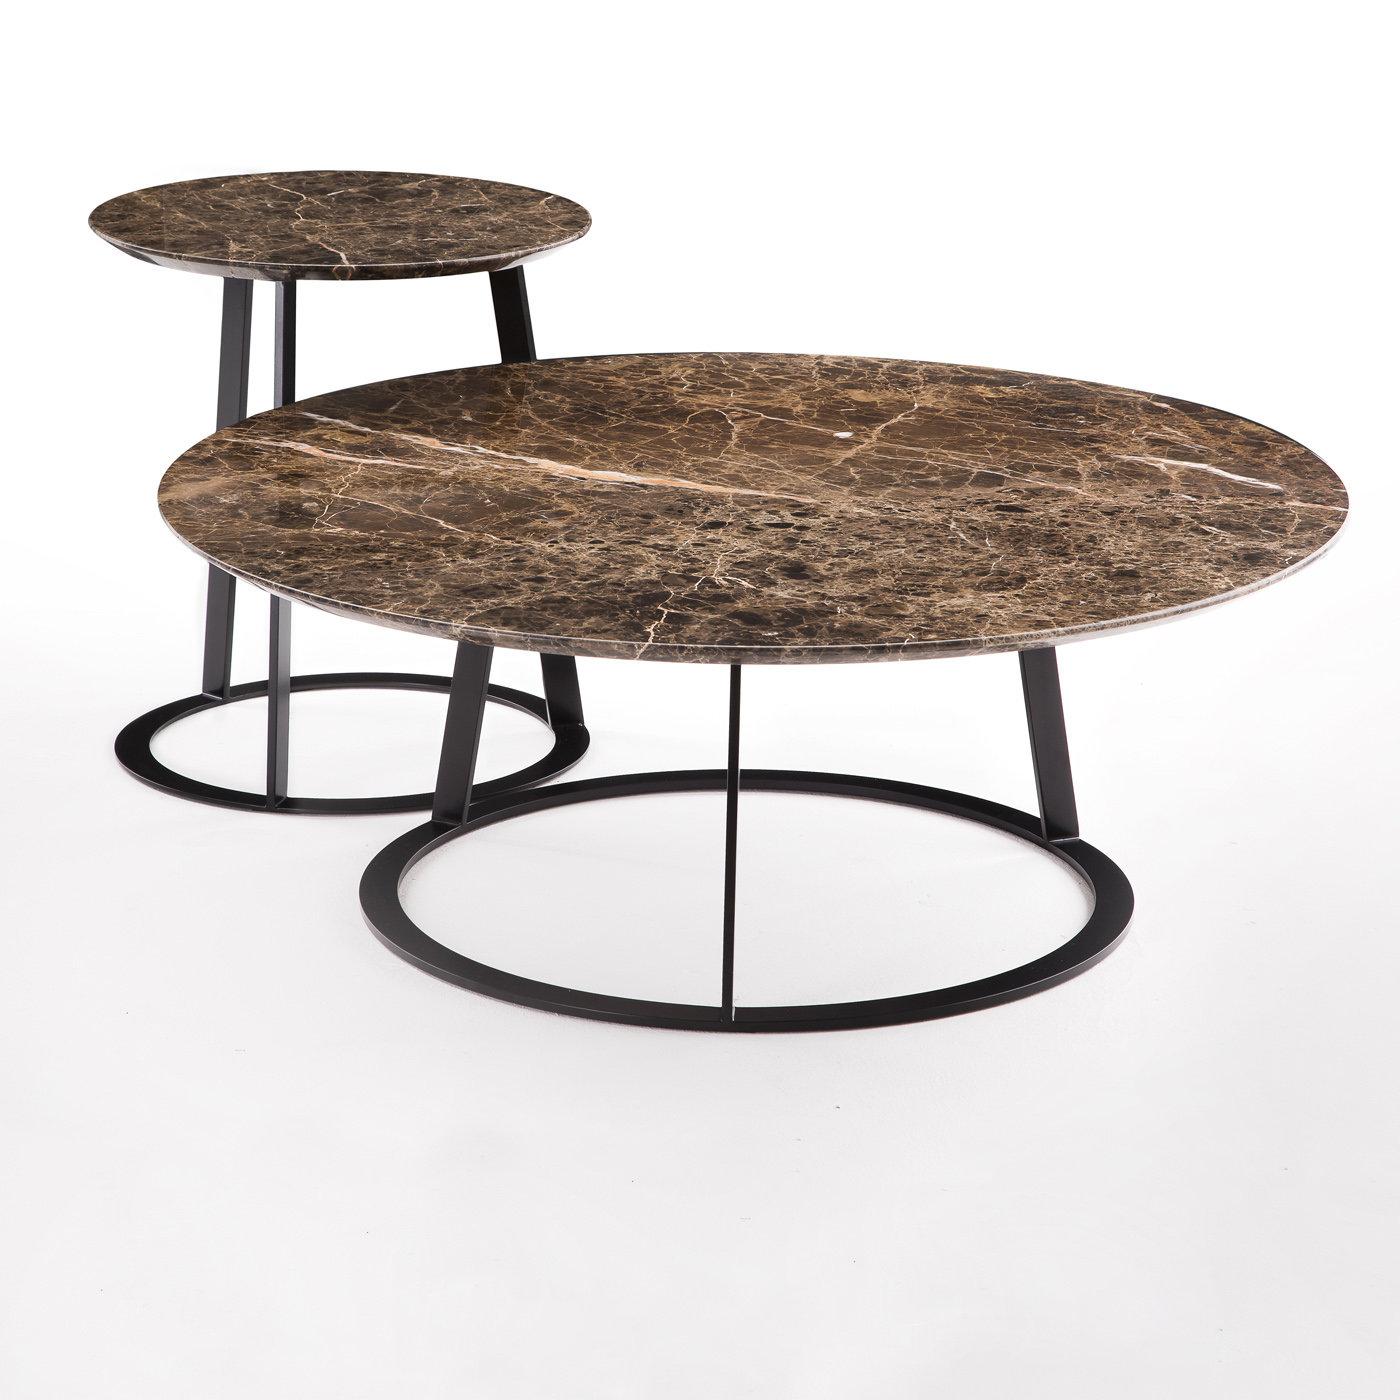 This coffee table was designed by Salvatore Indriolo following the success of his first Albino table introduced in 2010. A refined piece of functional decor, it features a round top made of Emperador dark marble resting on a robust black